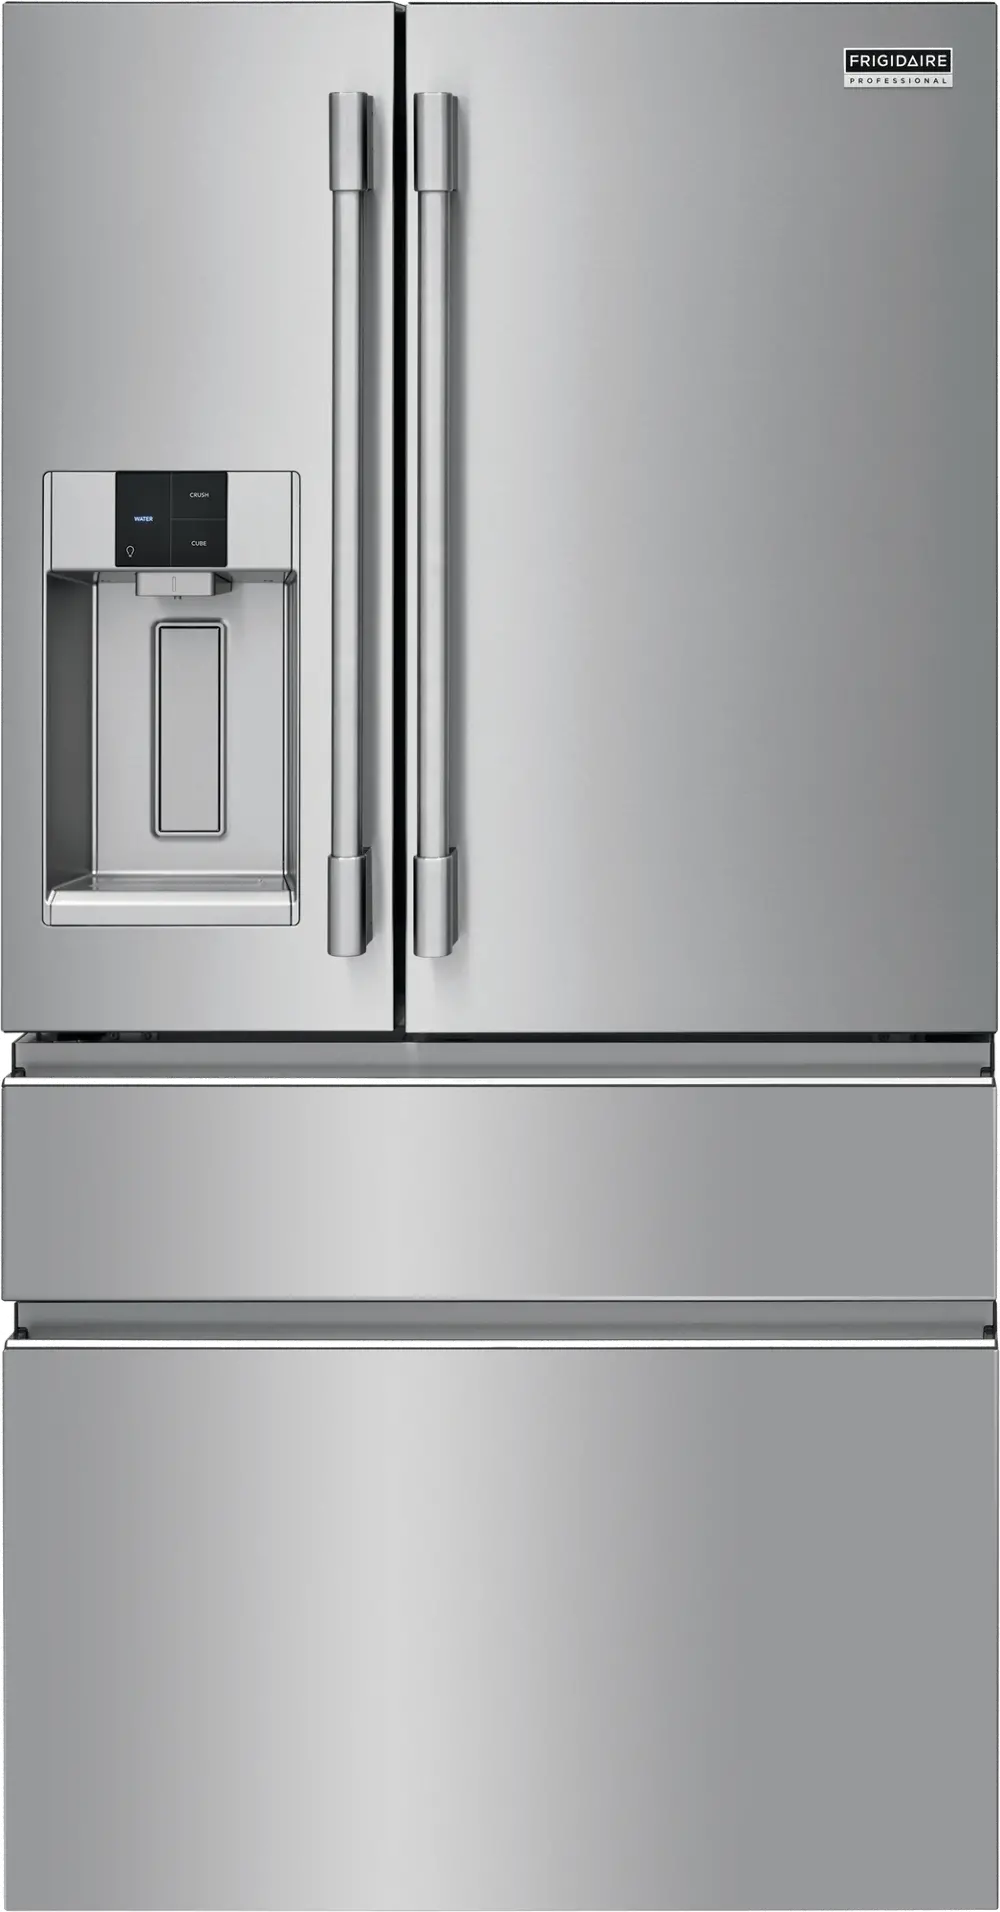 PRMC2285AF Frigidaire Professional 21.8 cu ft French Door Refrigerator - Counter Depth Stainless Steel-1